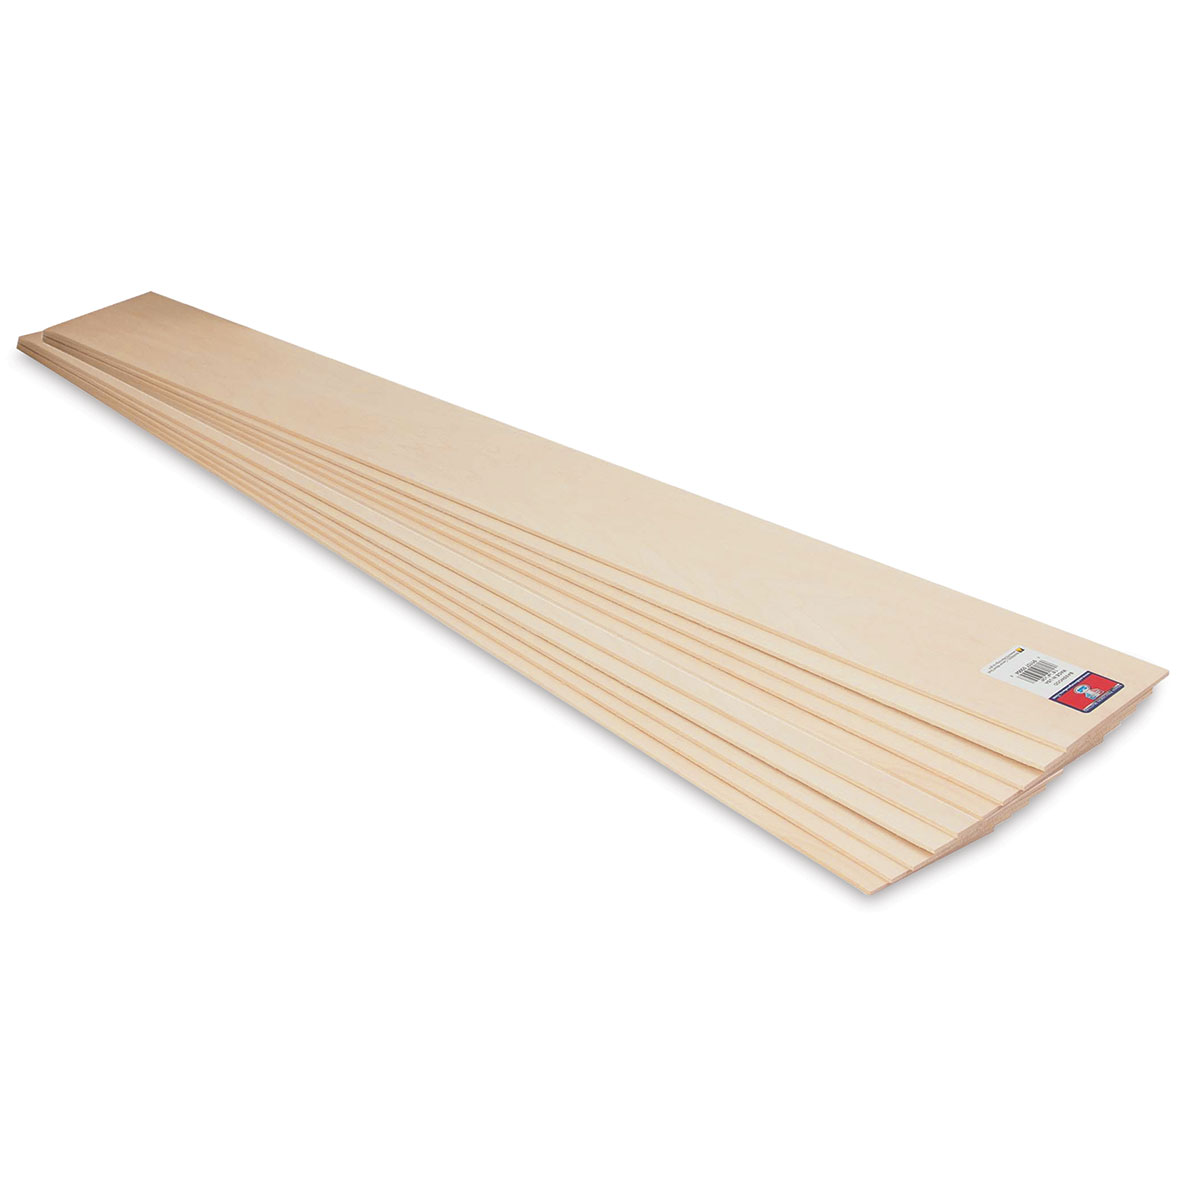 Midwest Products Mi4308 Basswood Sheet 3/8x3x24 for sale online 